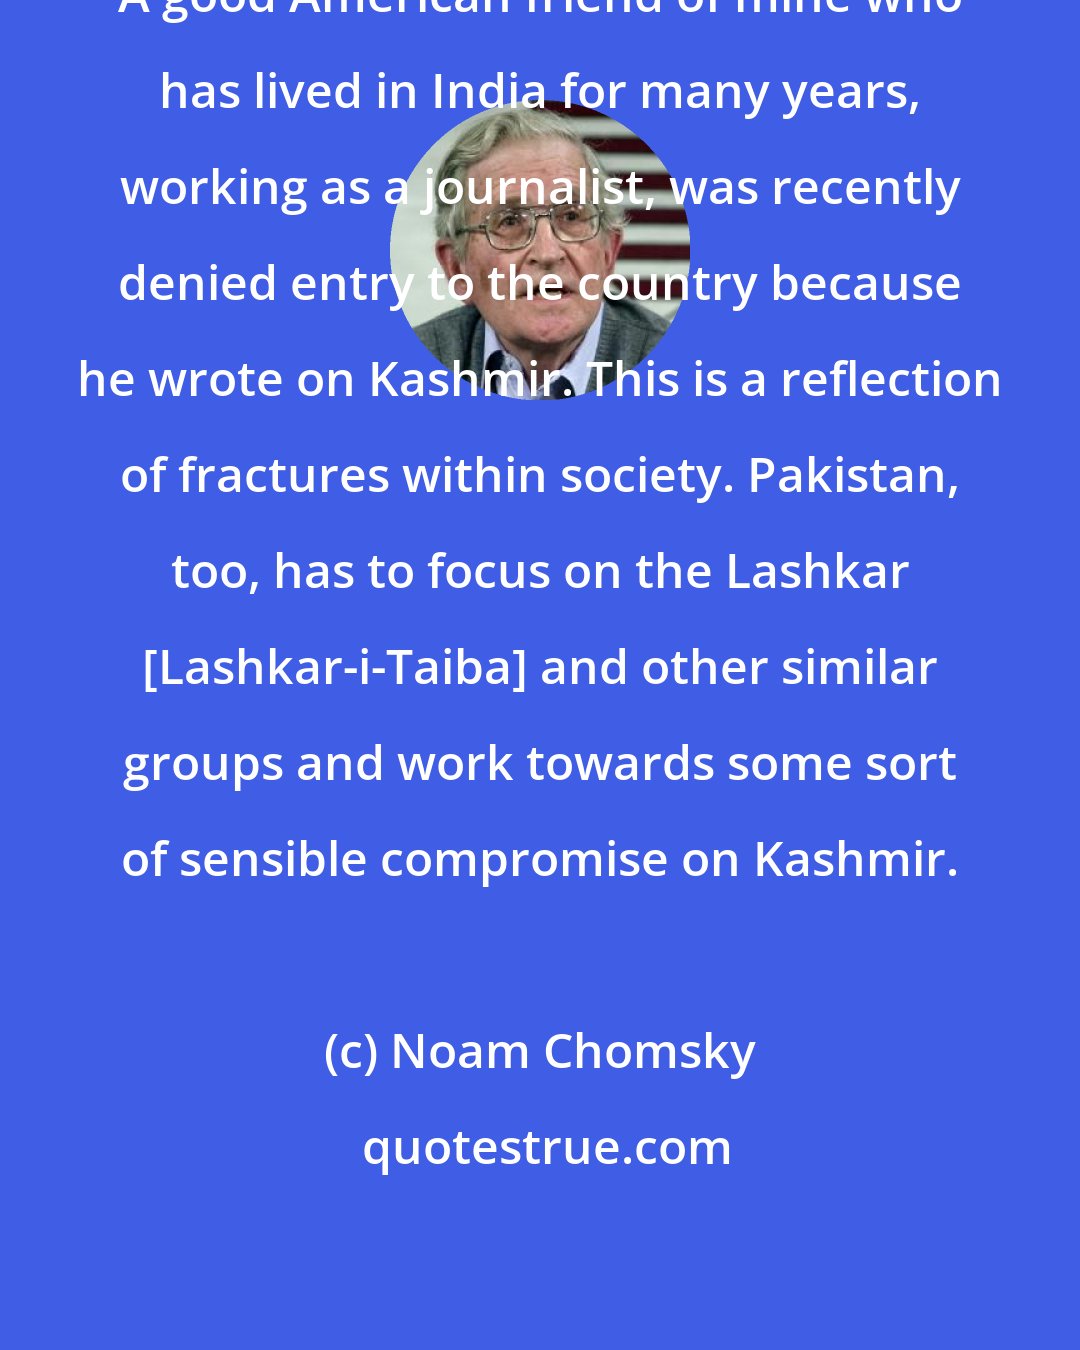 Noam Chomsky: A good American friend of mine who has lived in India for many years, working as a journalist, was recently denied entry to the country because he wrote on Kashmir. This is a reflection of fractures within society. Pakistan, too, has to focus on the Lashkar [Lashkar-i-Taiba] and other similar groups and work towards some sort of sensible compromise on Kashmir.